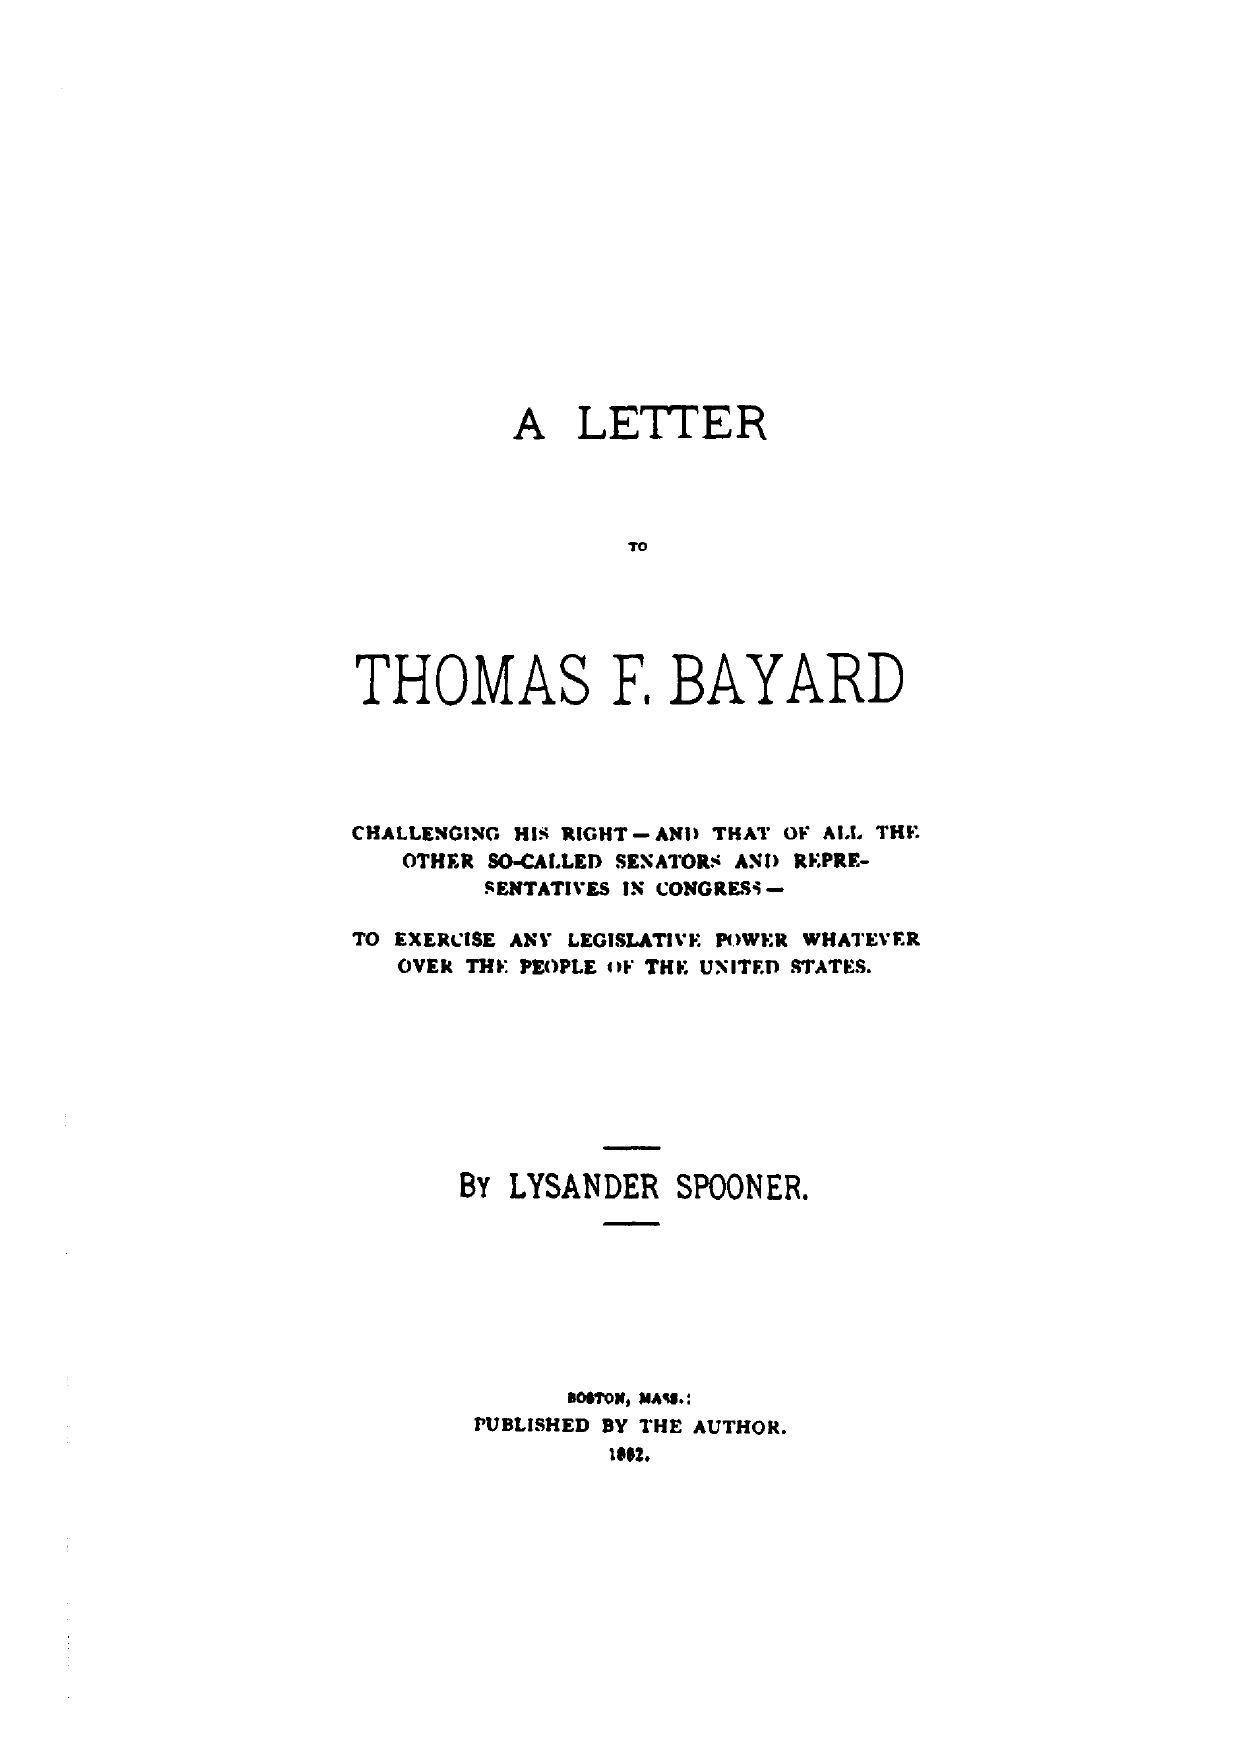 A Letter to Thomas F Bayard (1882) by Lysander Spooner